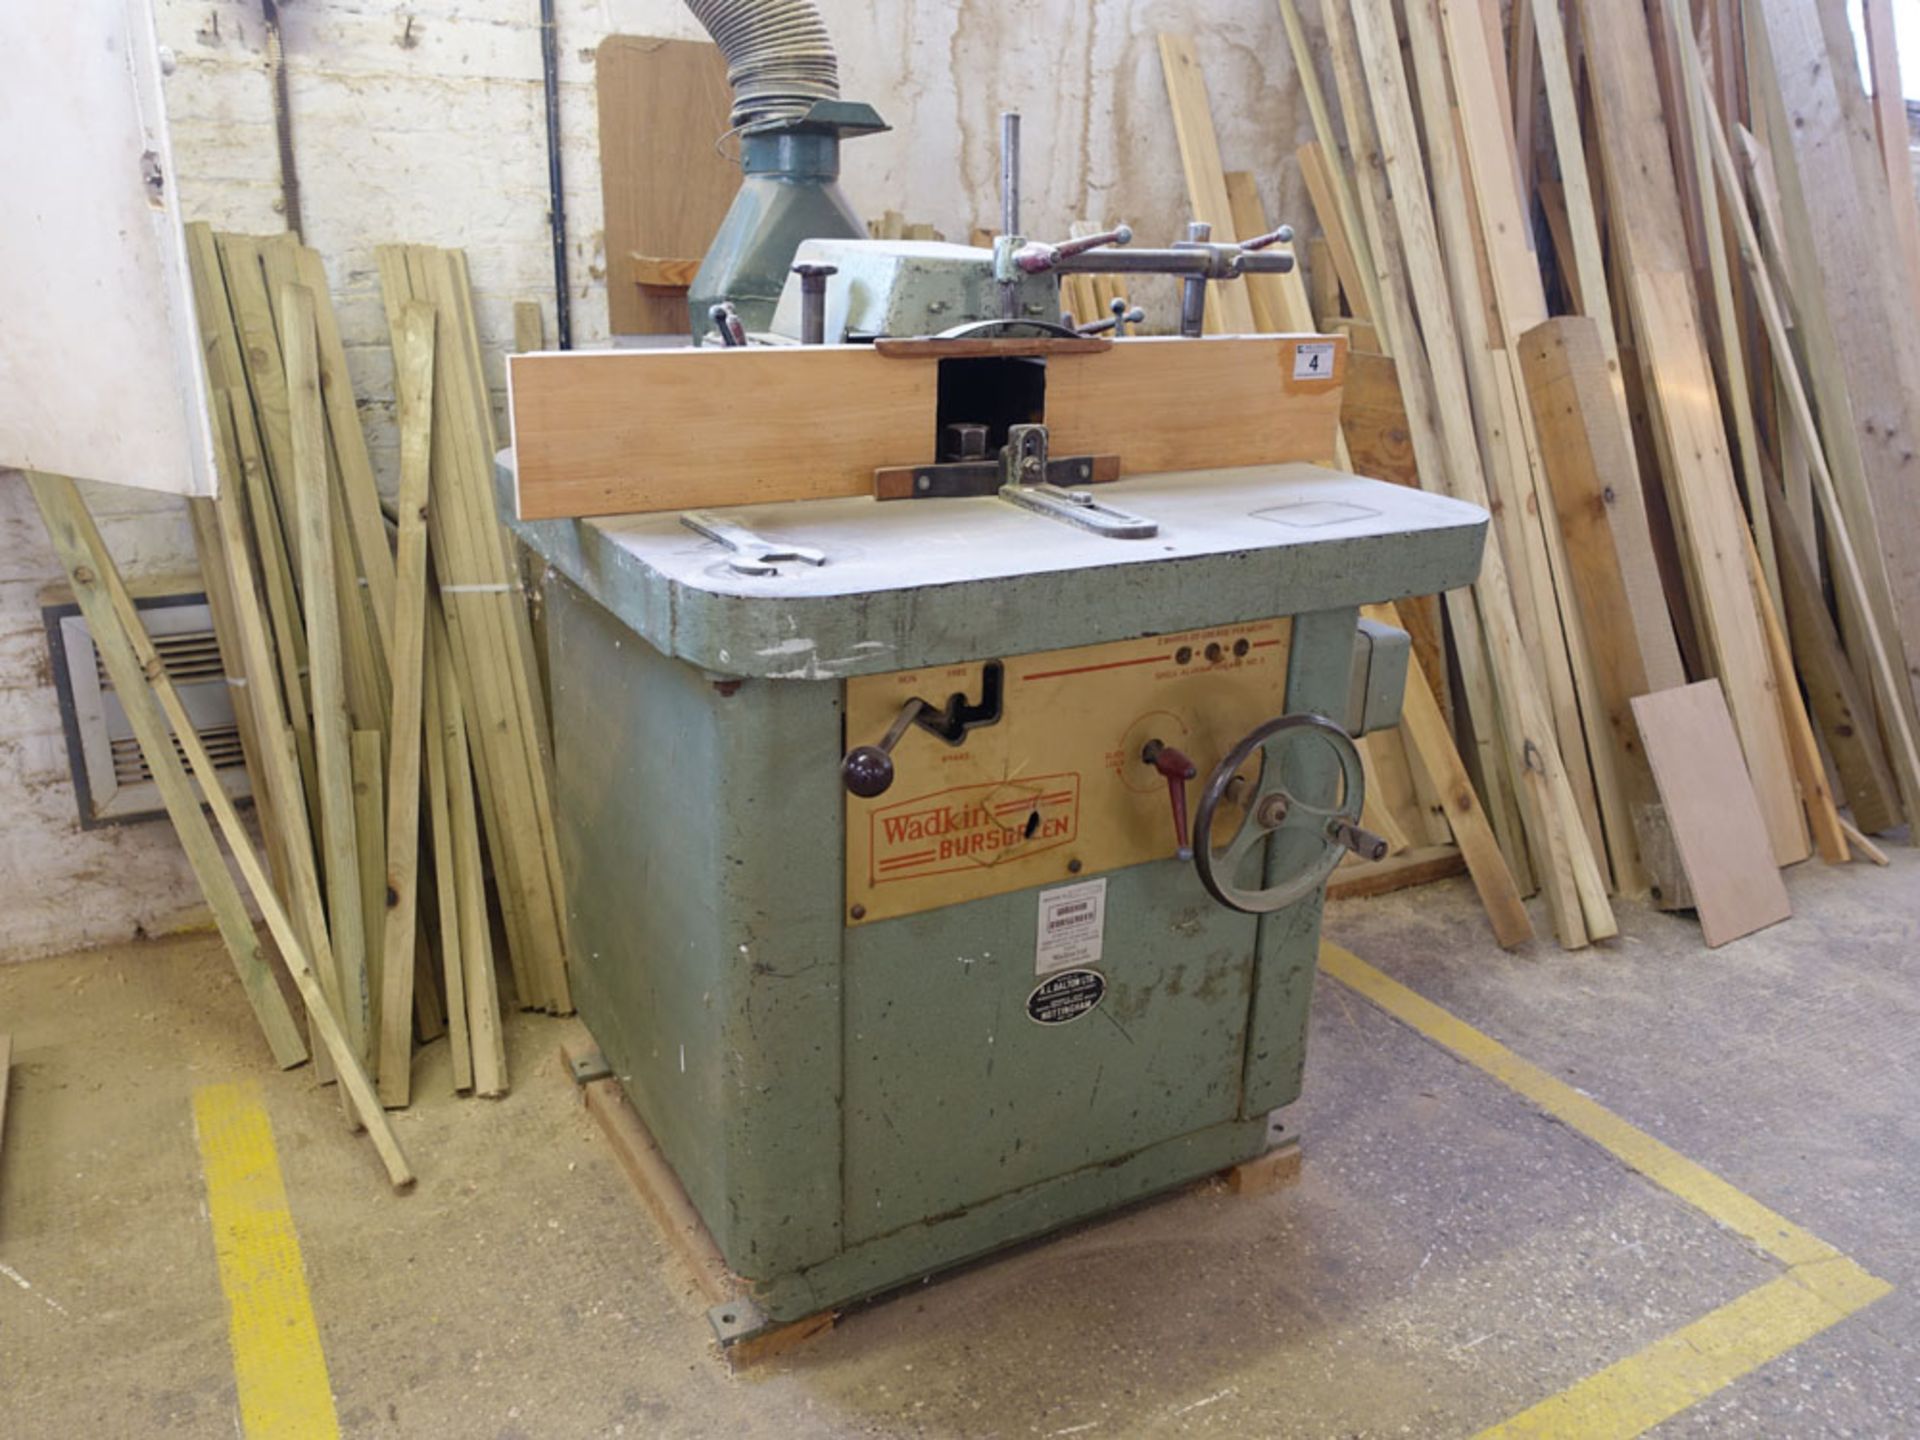 Wadkin Bursgreen spindle molder model BER3, serial no 741122 together with a cabinet containing a - Image 2 of 5